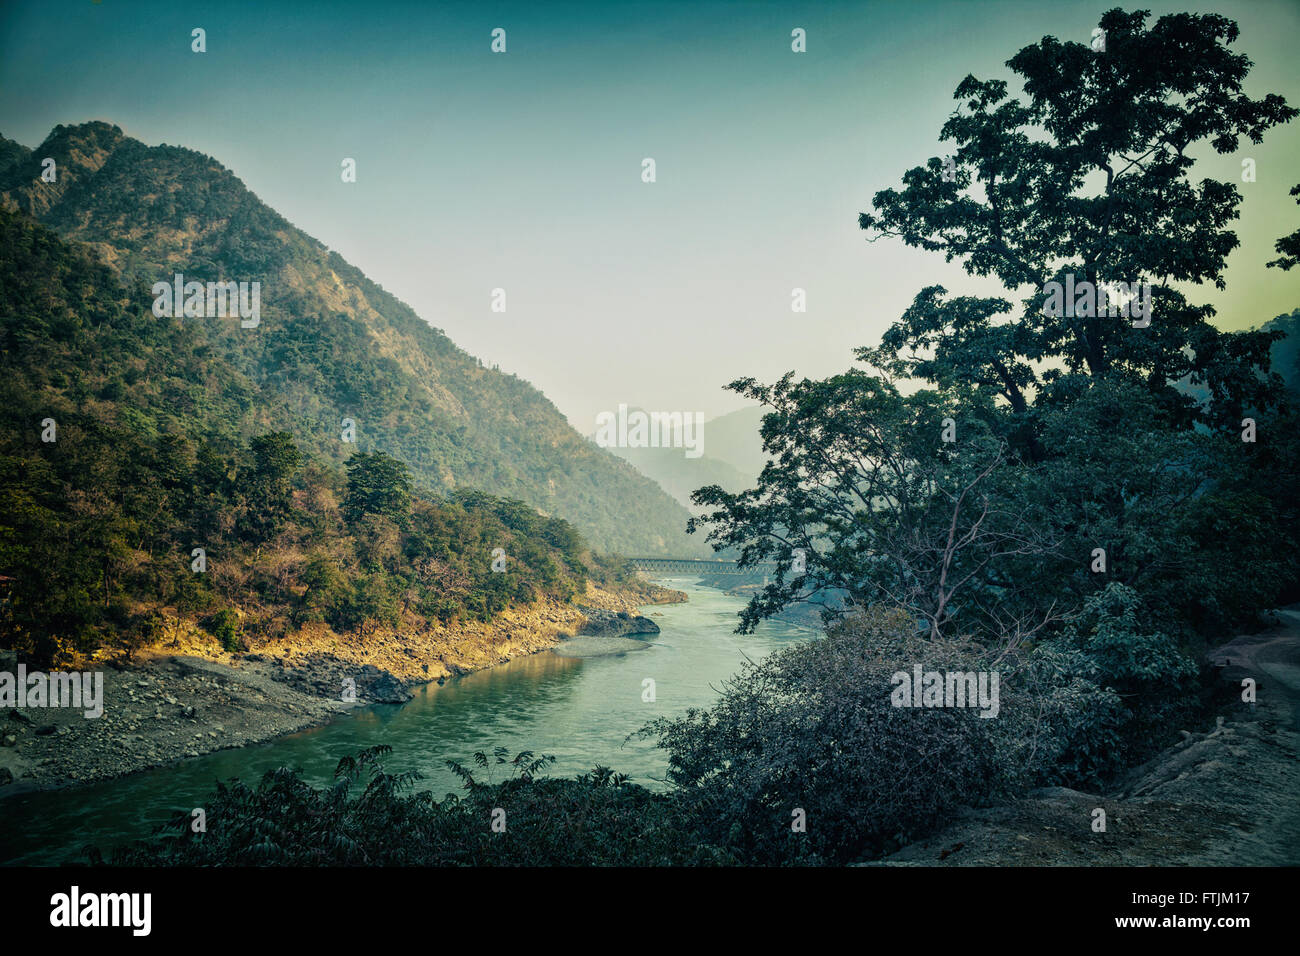 Landscape with mountains and river. Rishikesh, India Stock Photo